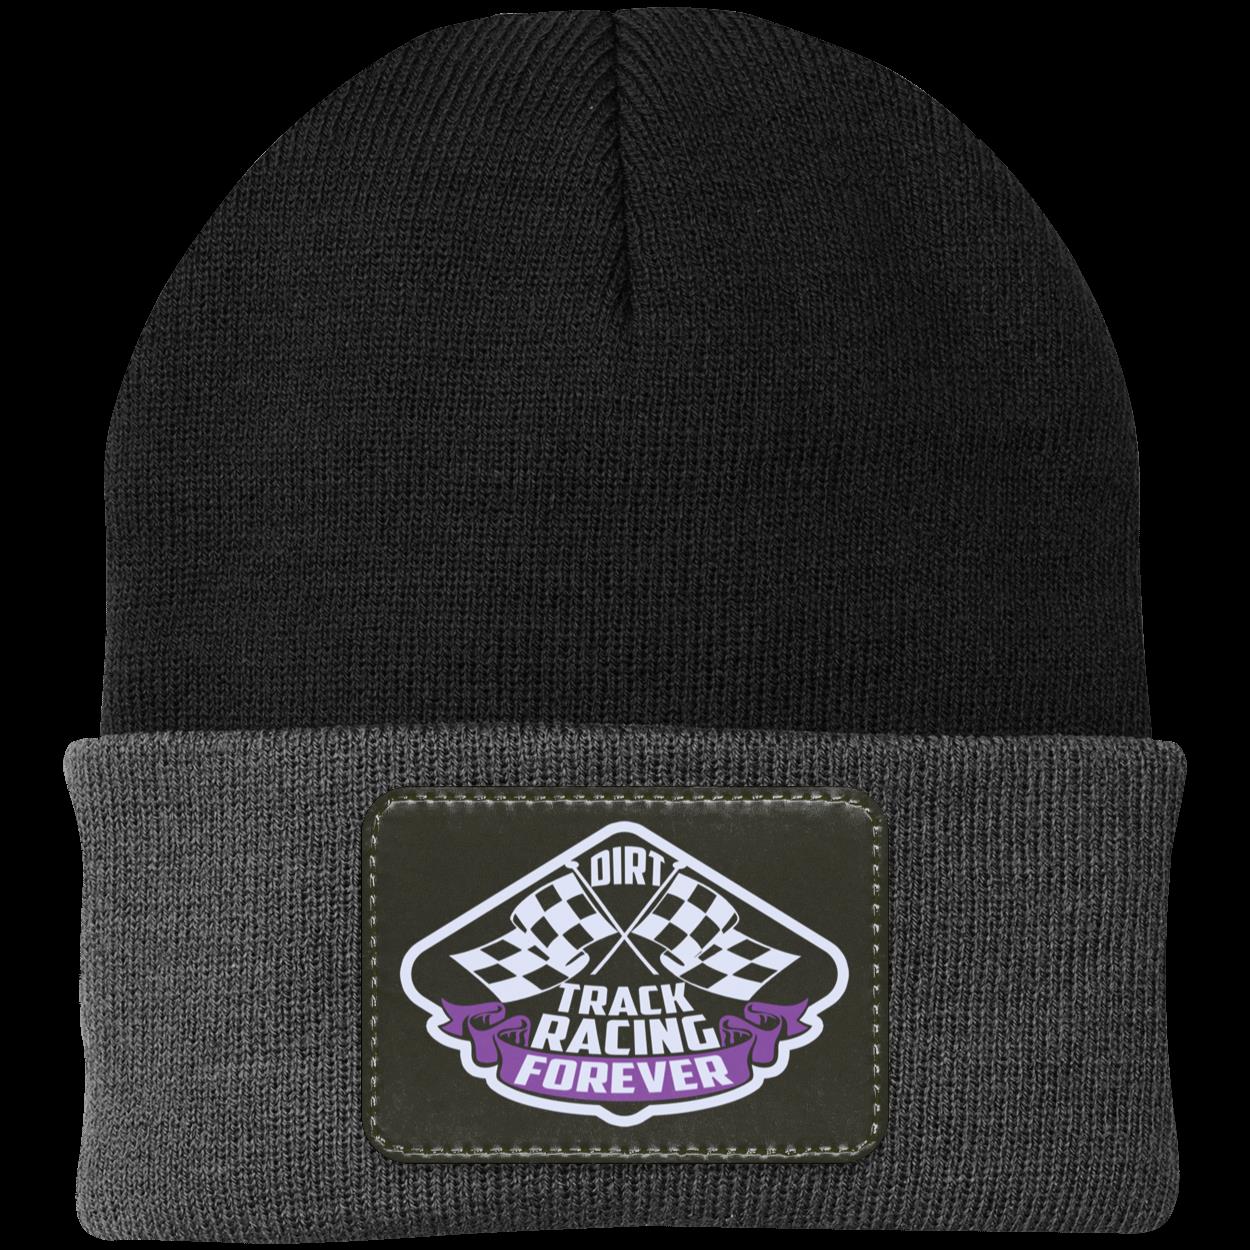 Racing Forever Patched Knit Cap V2